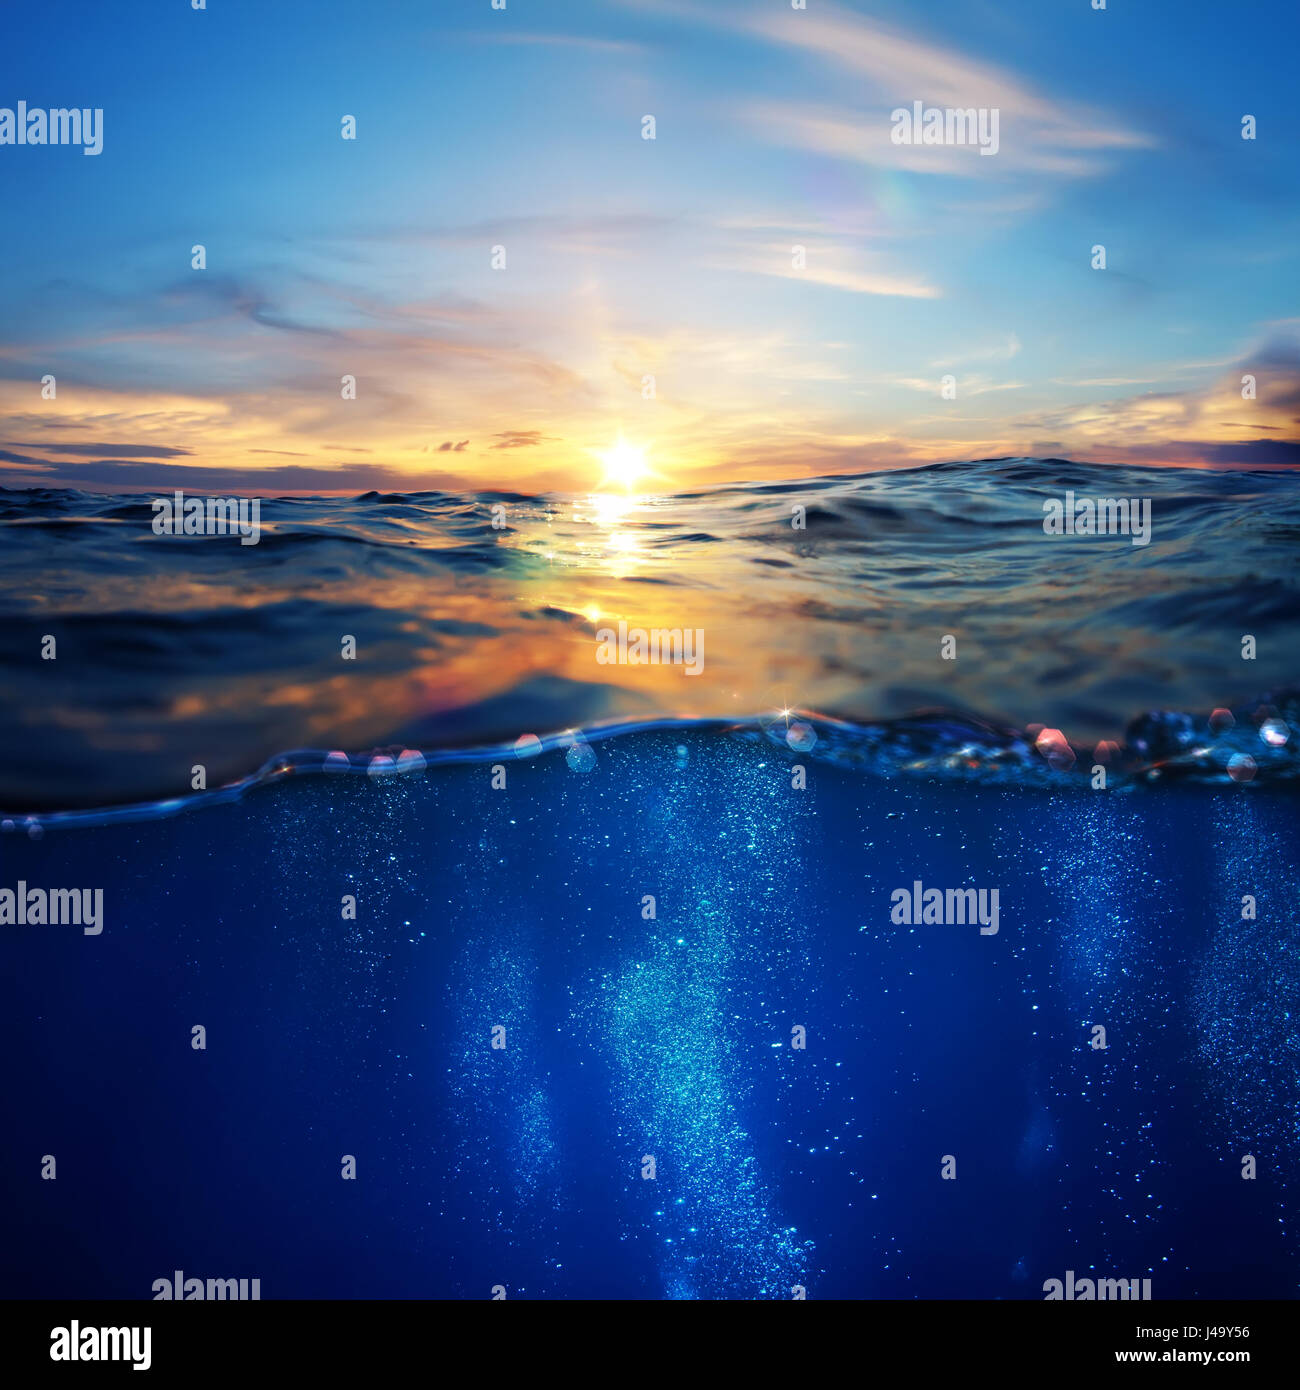 design template with underwater part and sunset skylight splitted by ...